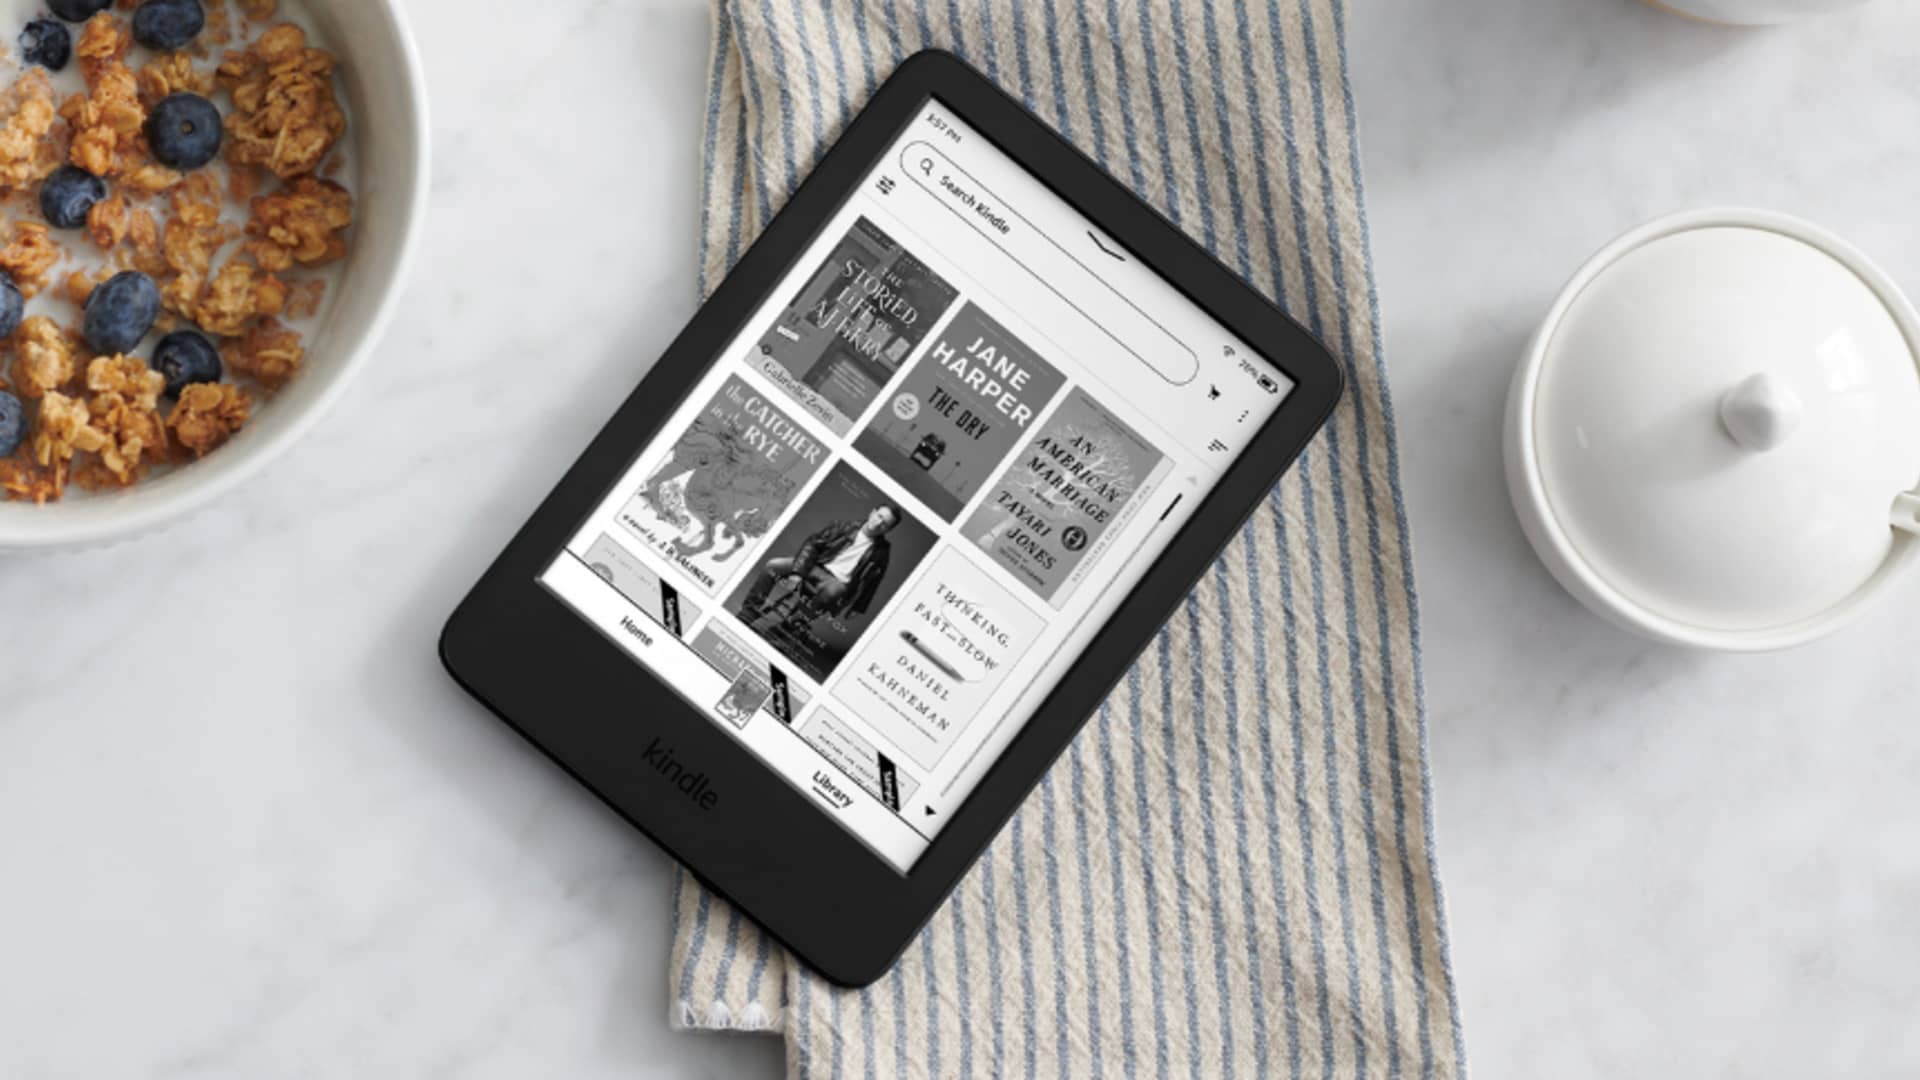 Amazon Kindle 2022 Announced For 99 With Usb C Better Screen